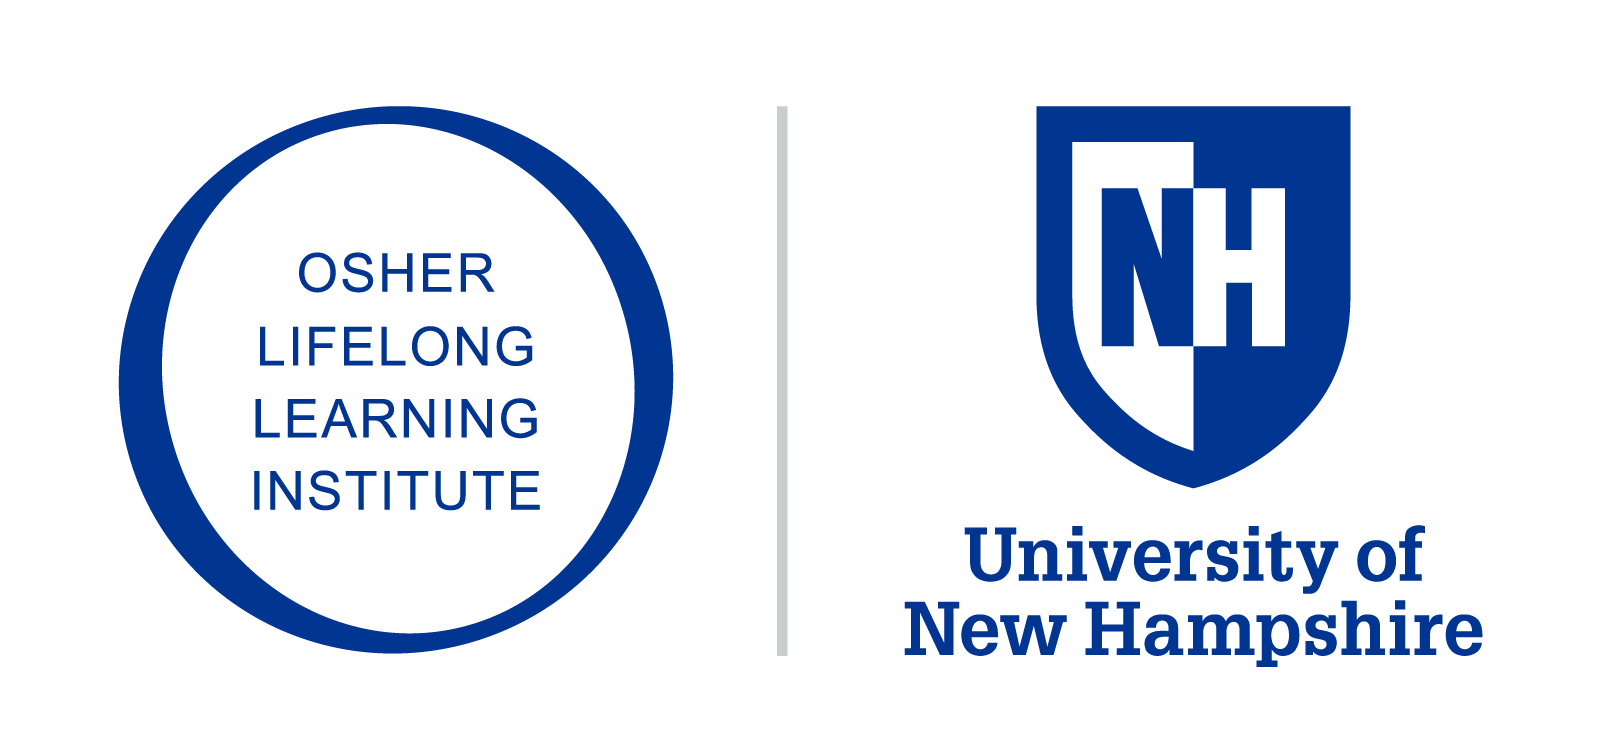 Osher Lifelong Learning Institute (OLLI at UNH) logo